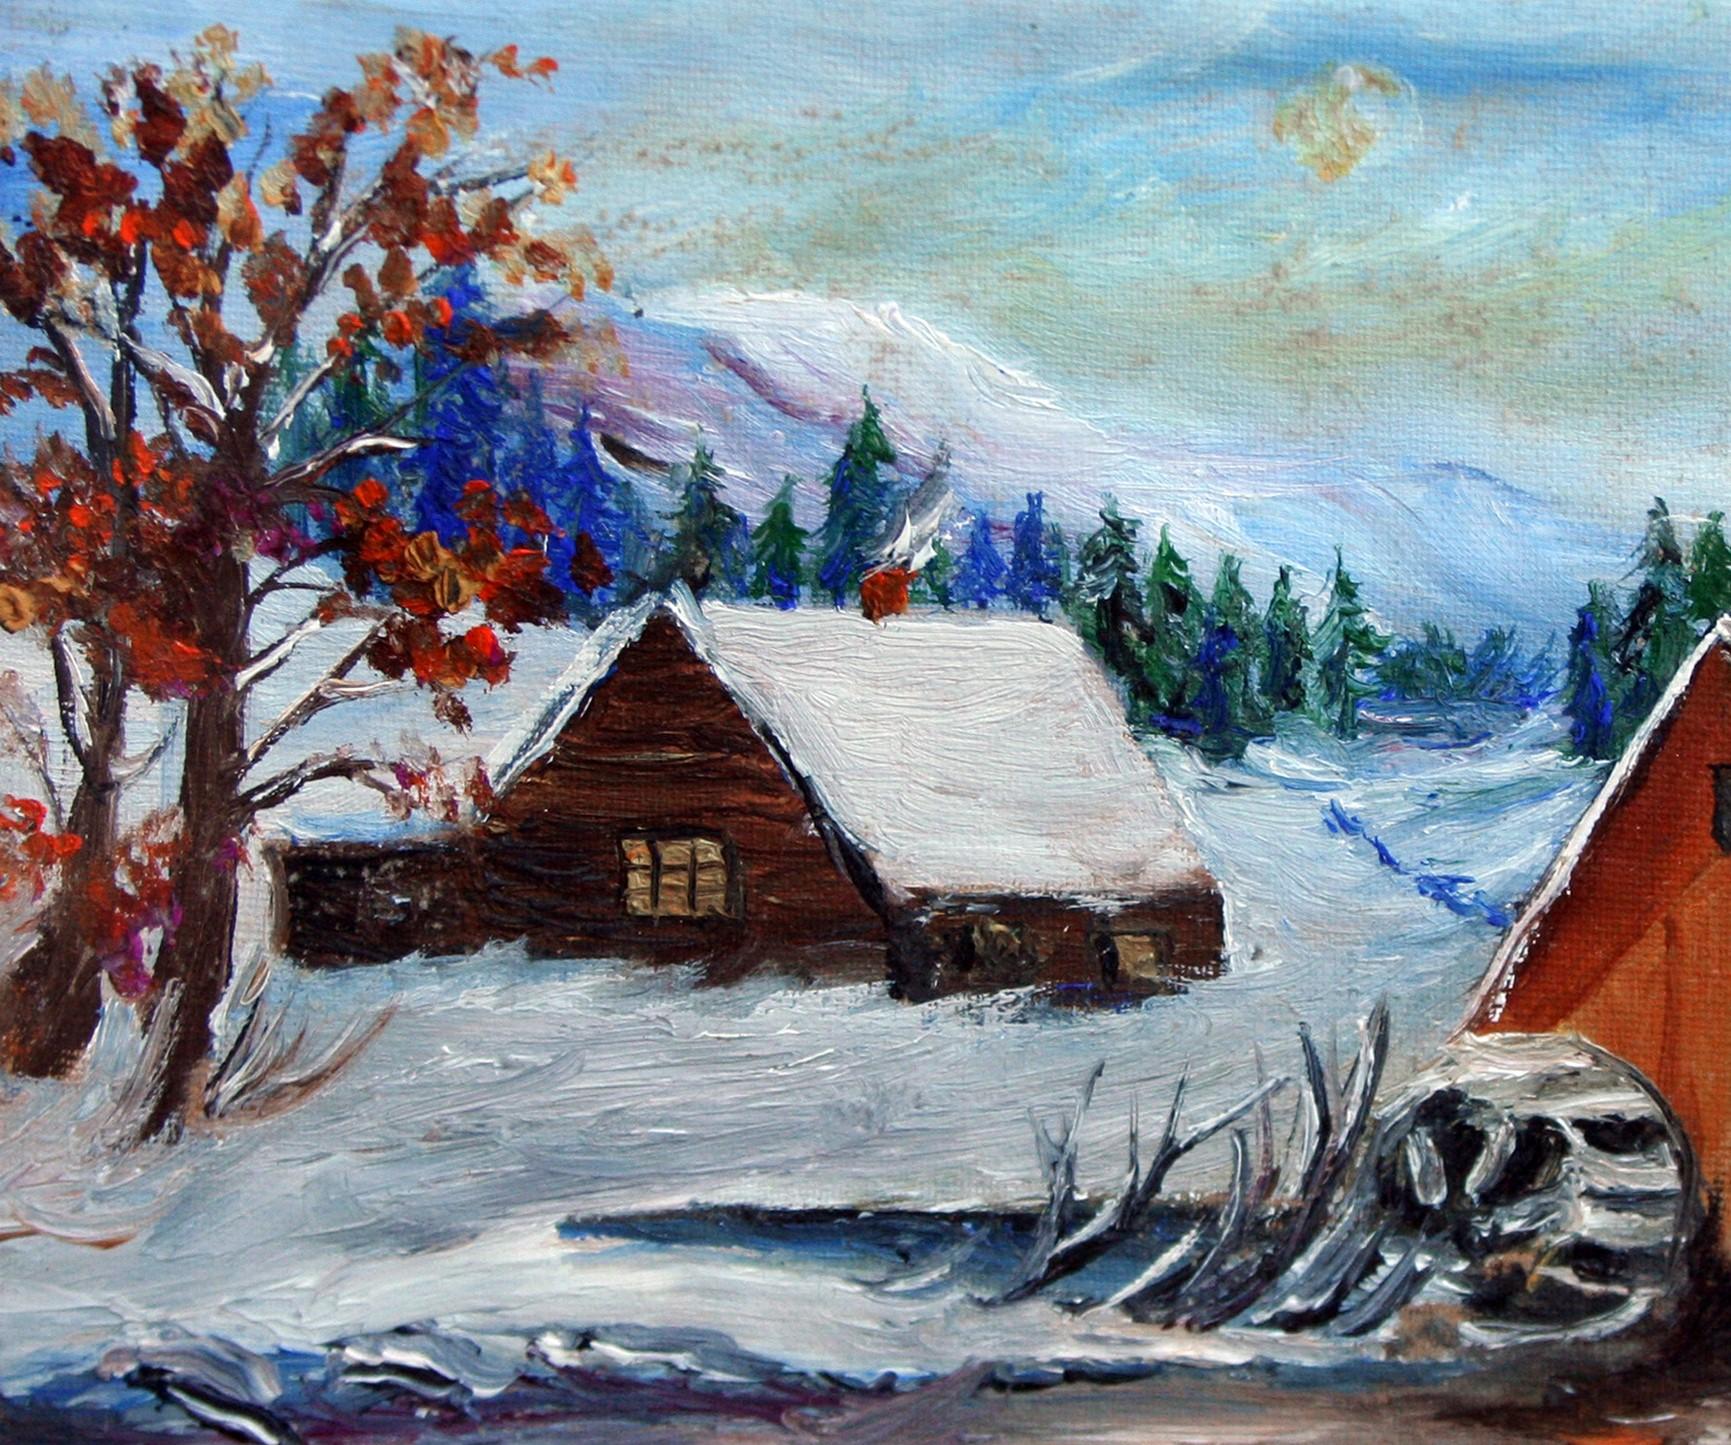 Scenic winter landscape of a grist mill and barn in a snowy mountain setting signed 